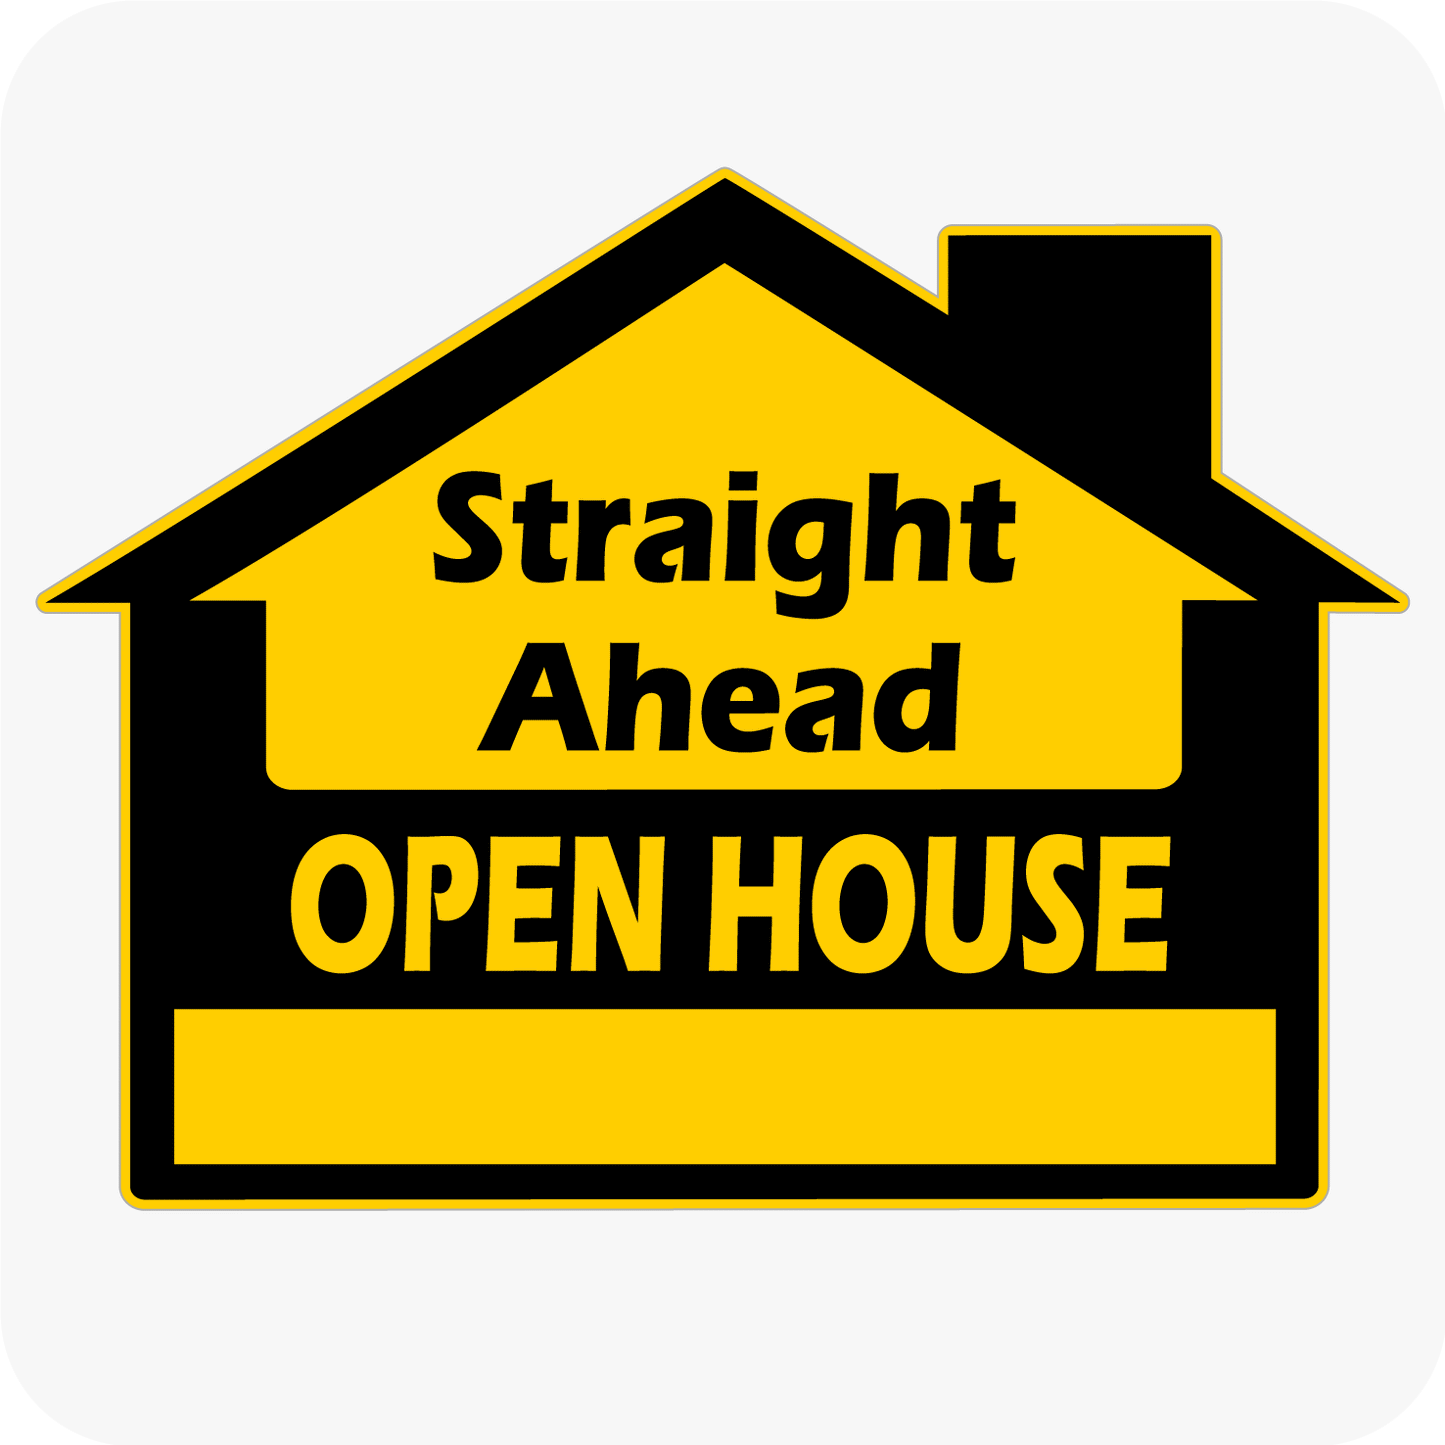 Straight Ahead Open House - House Shaped Sign 18 x 24 - Black and Yellow